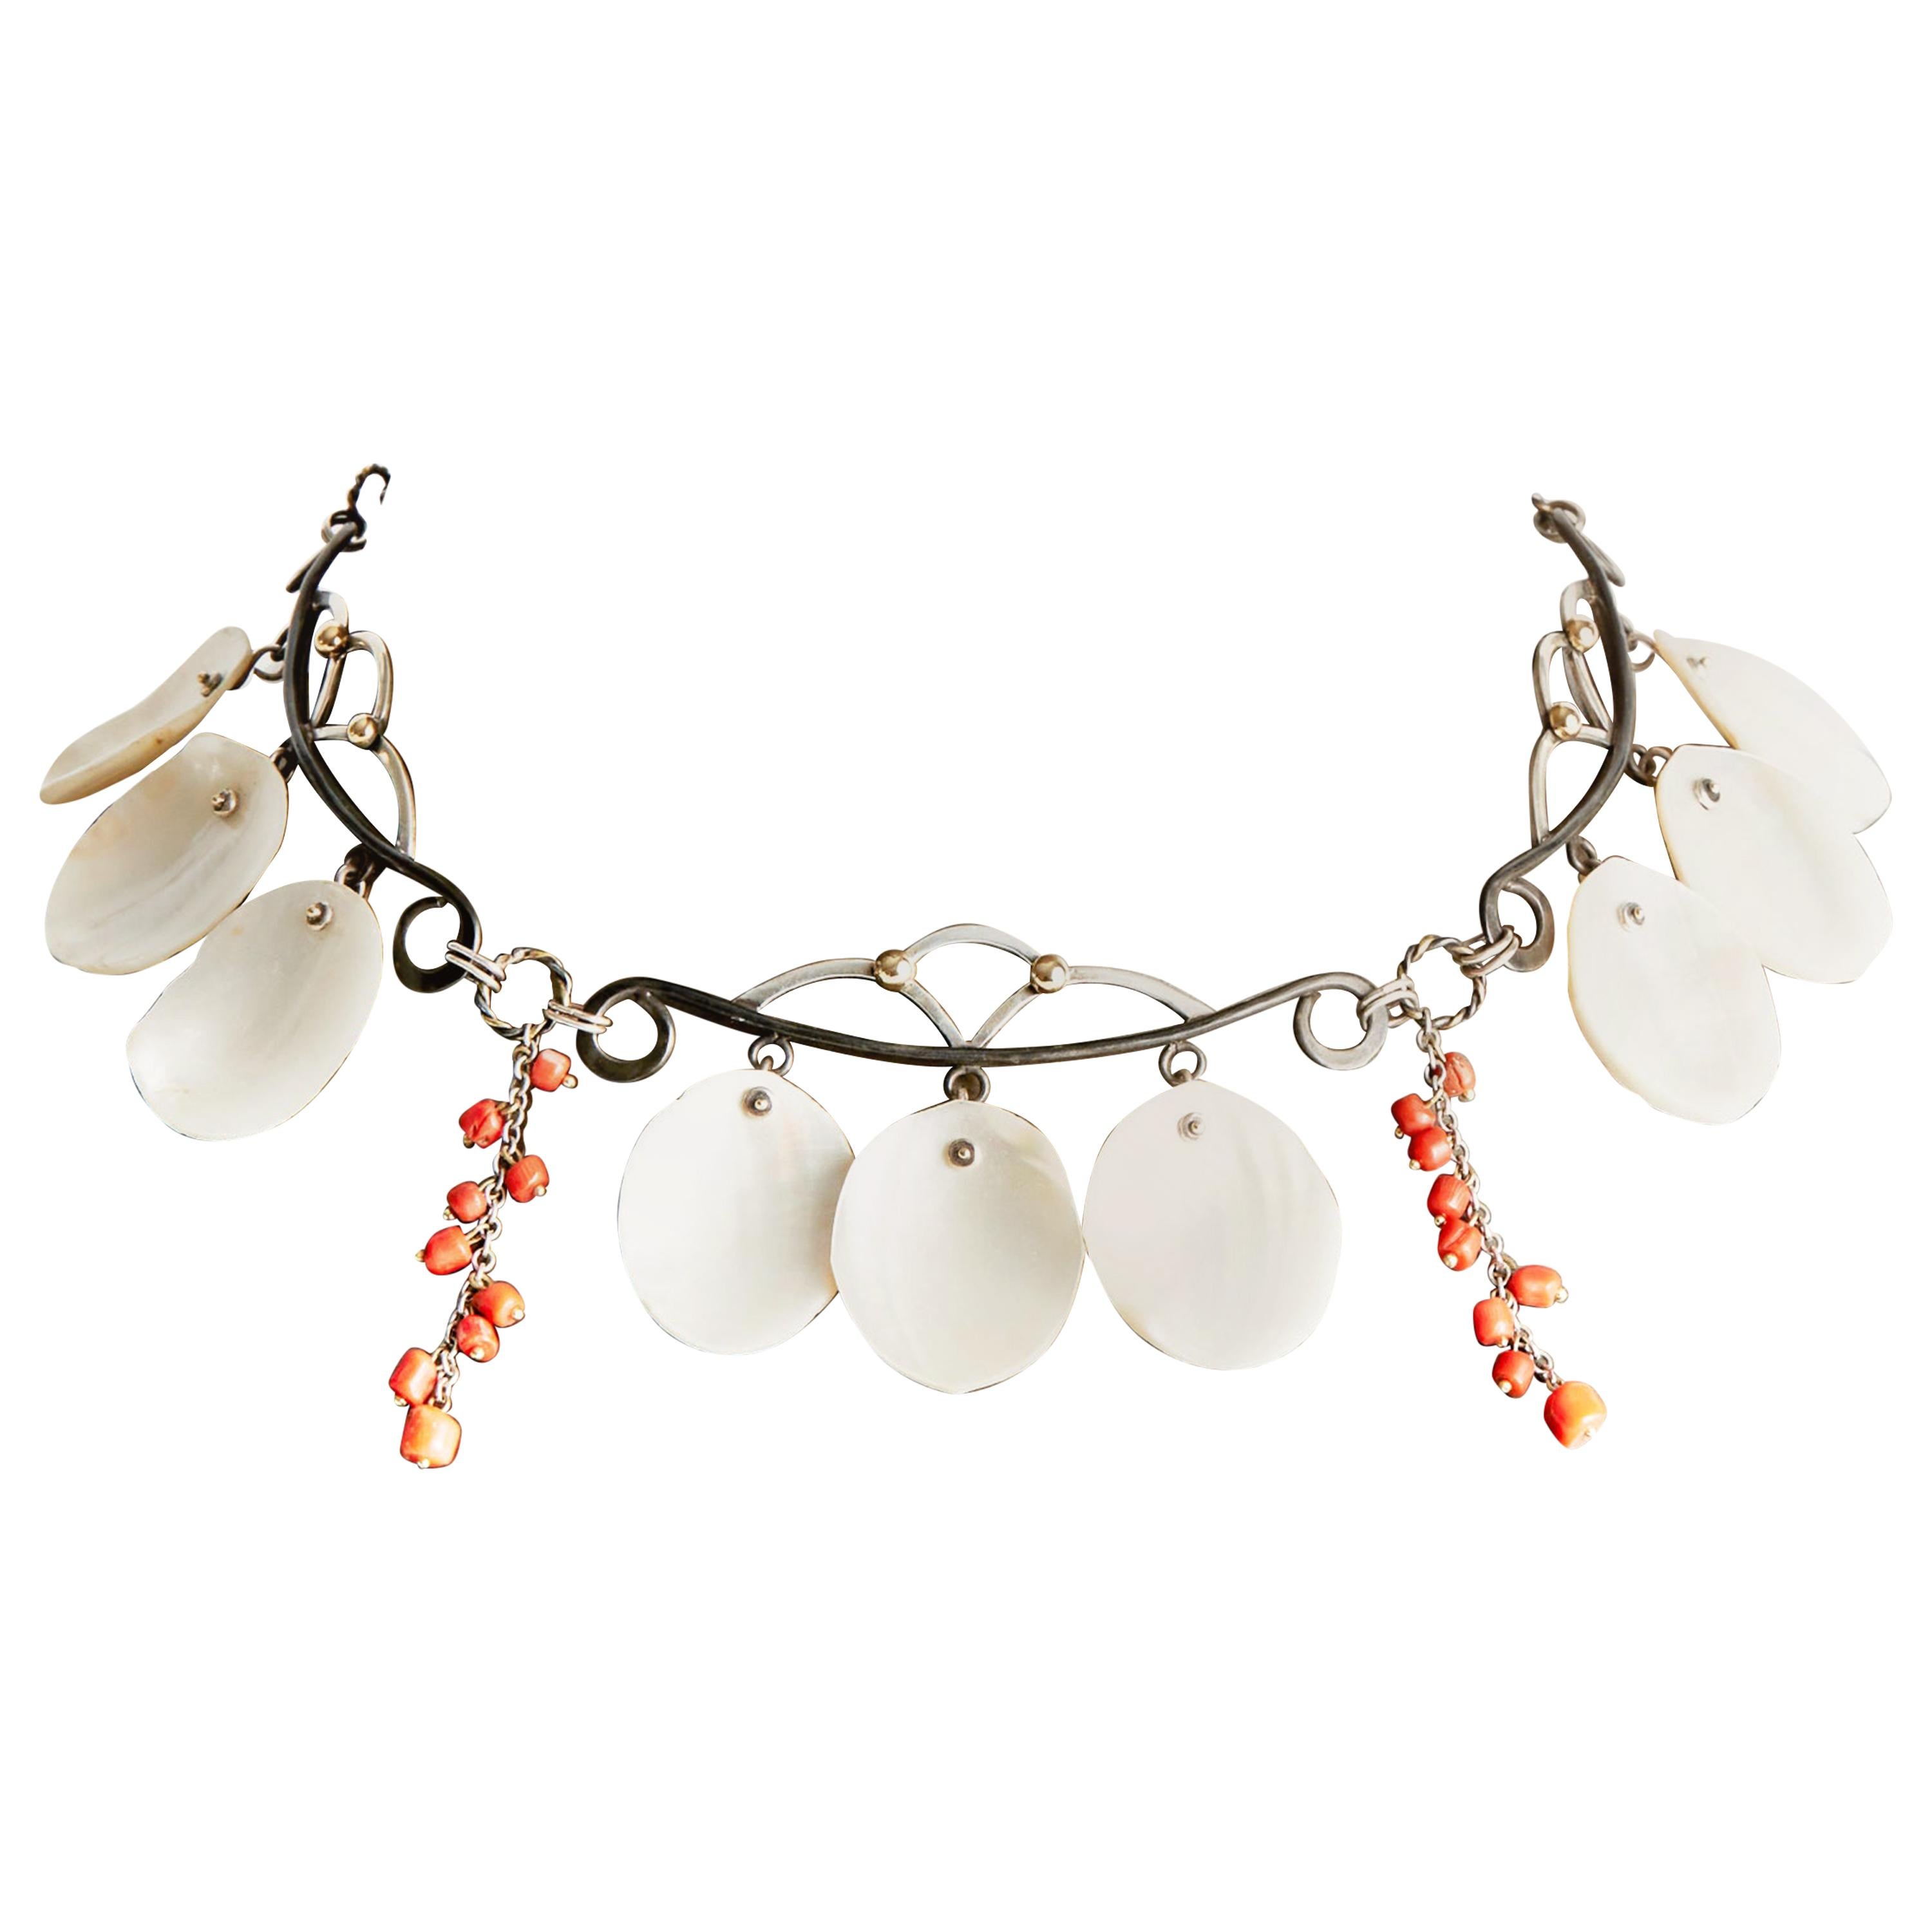 Audrey Werner, Sea Necklace, Sterling Silver, Mother of Pearl, & Coral, US, 2019 For Sale